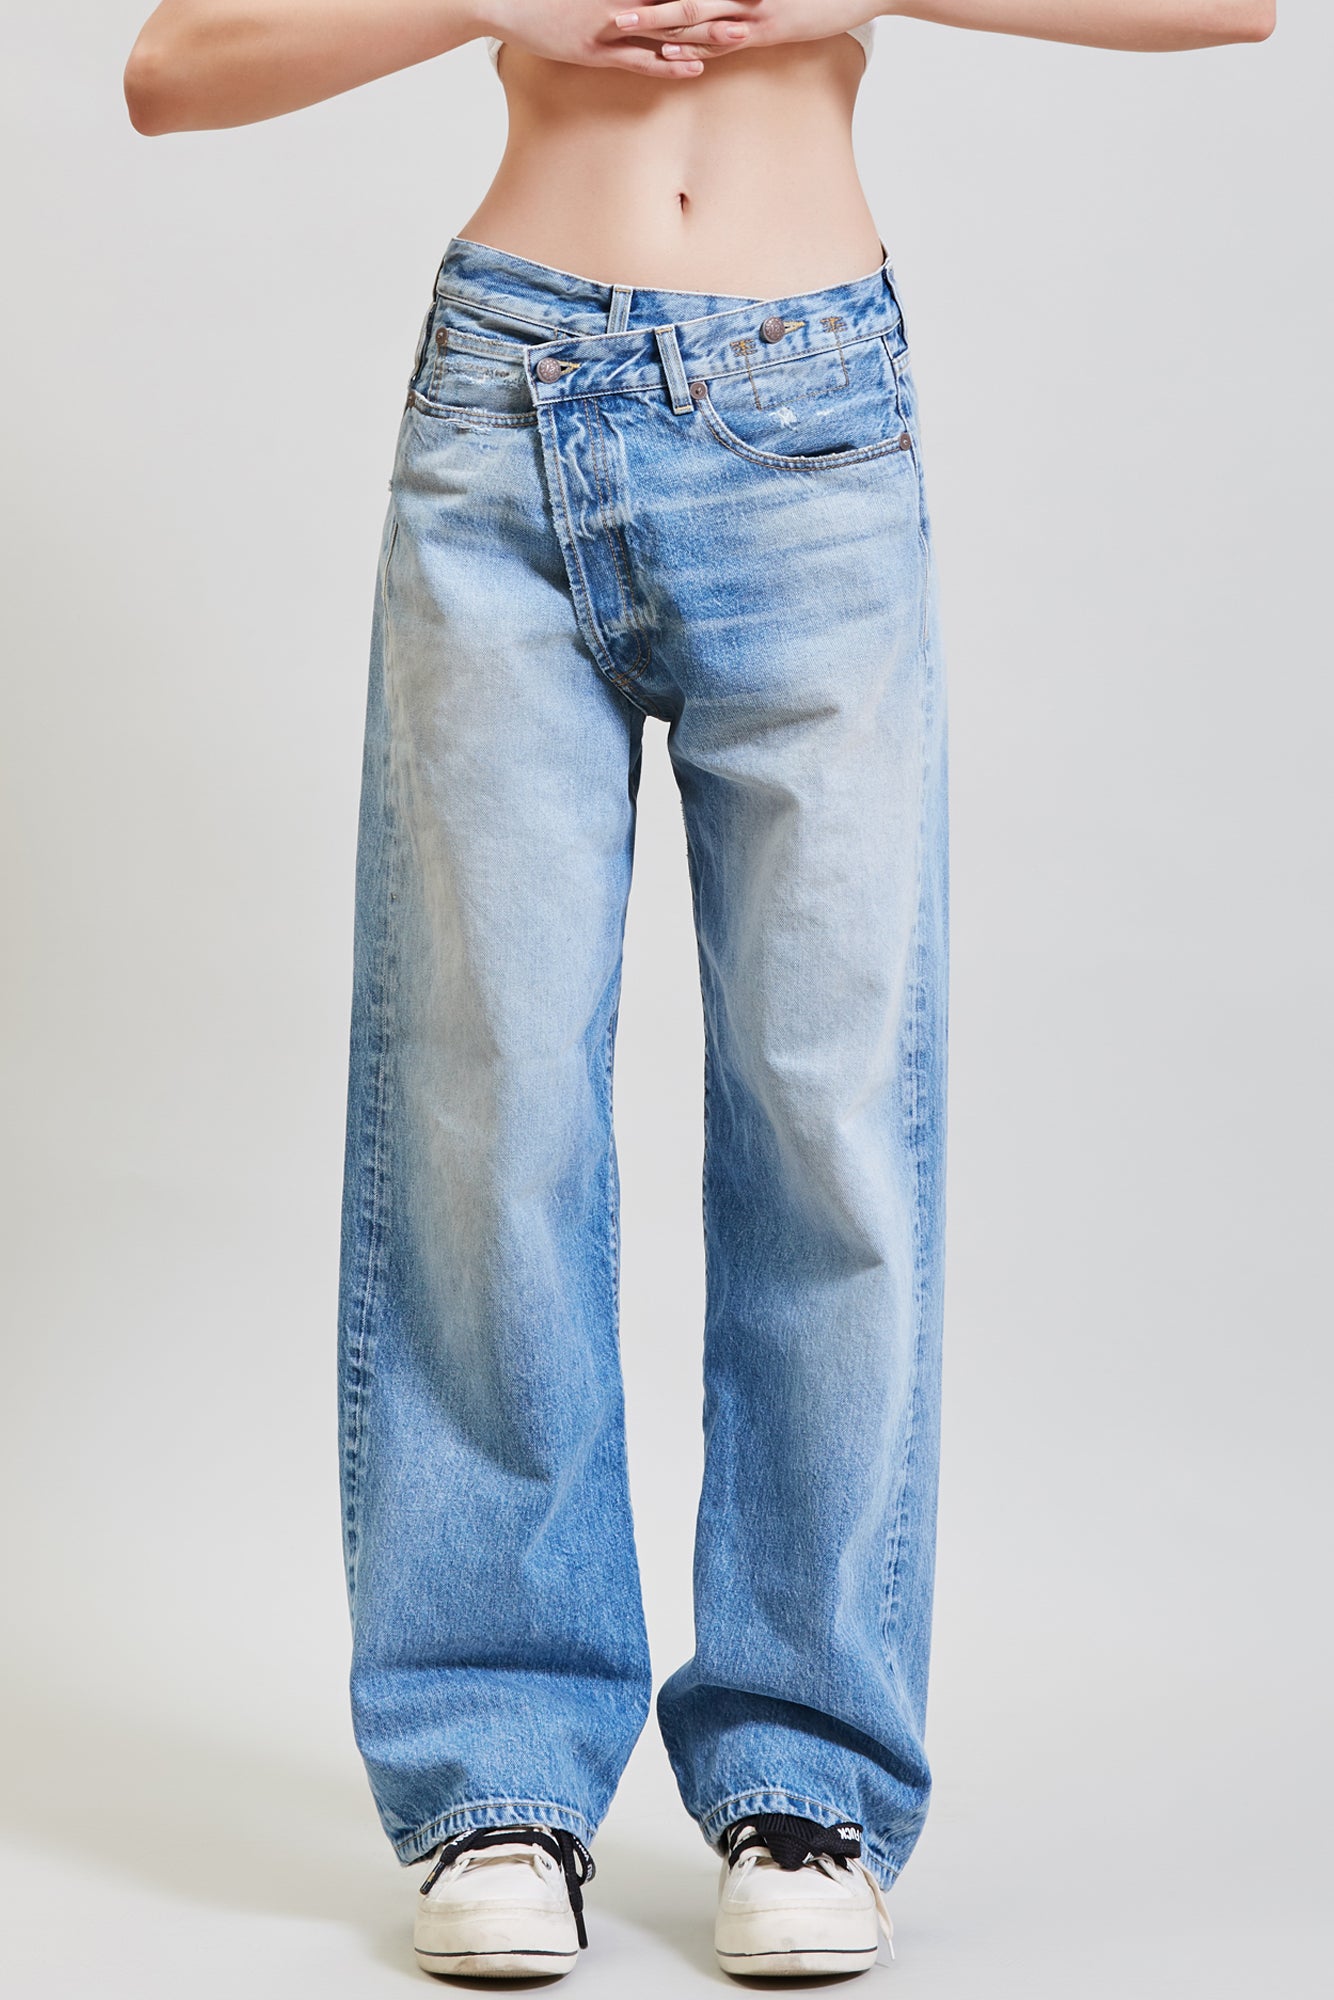 WIDE LEG CROSSOVER JEAN - IRVING BLUE